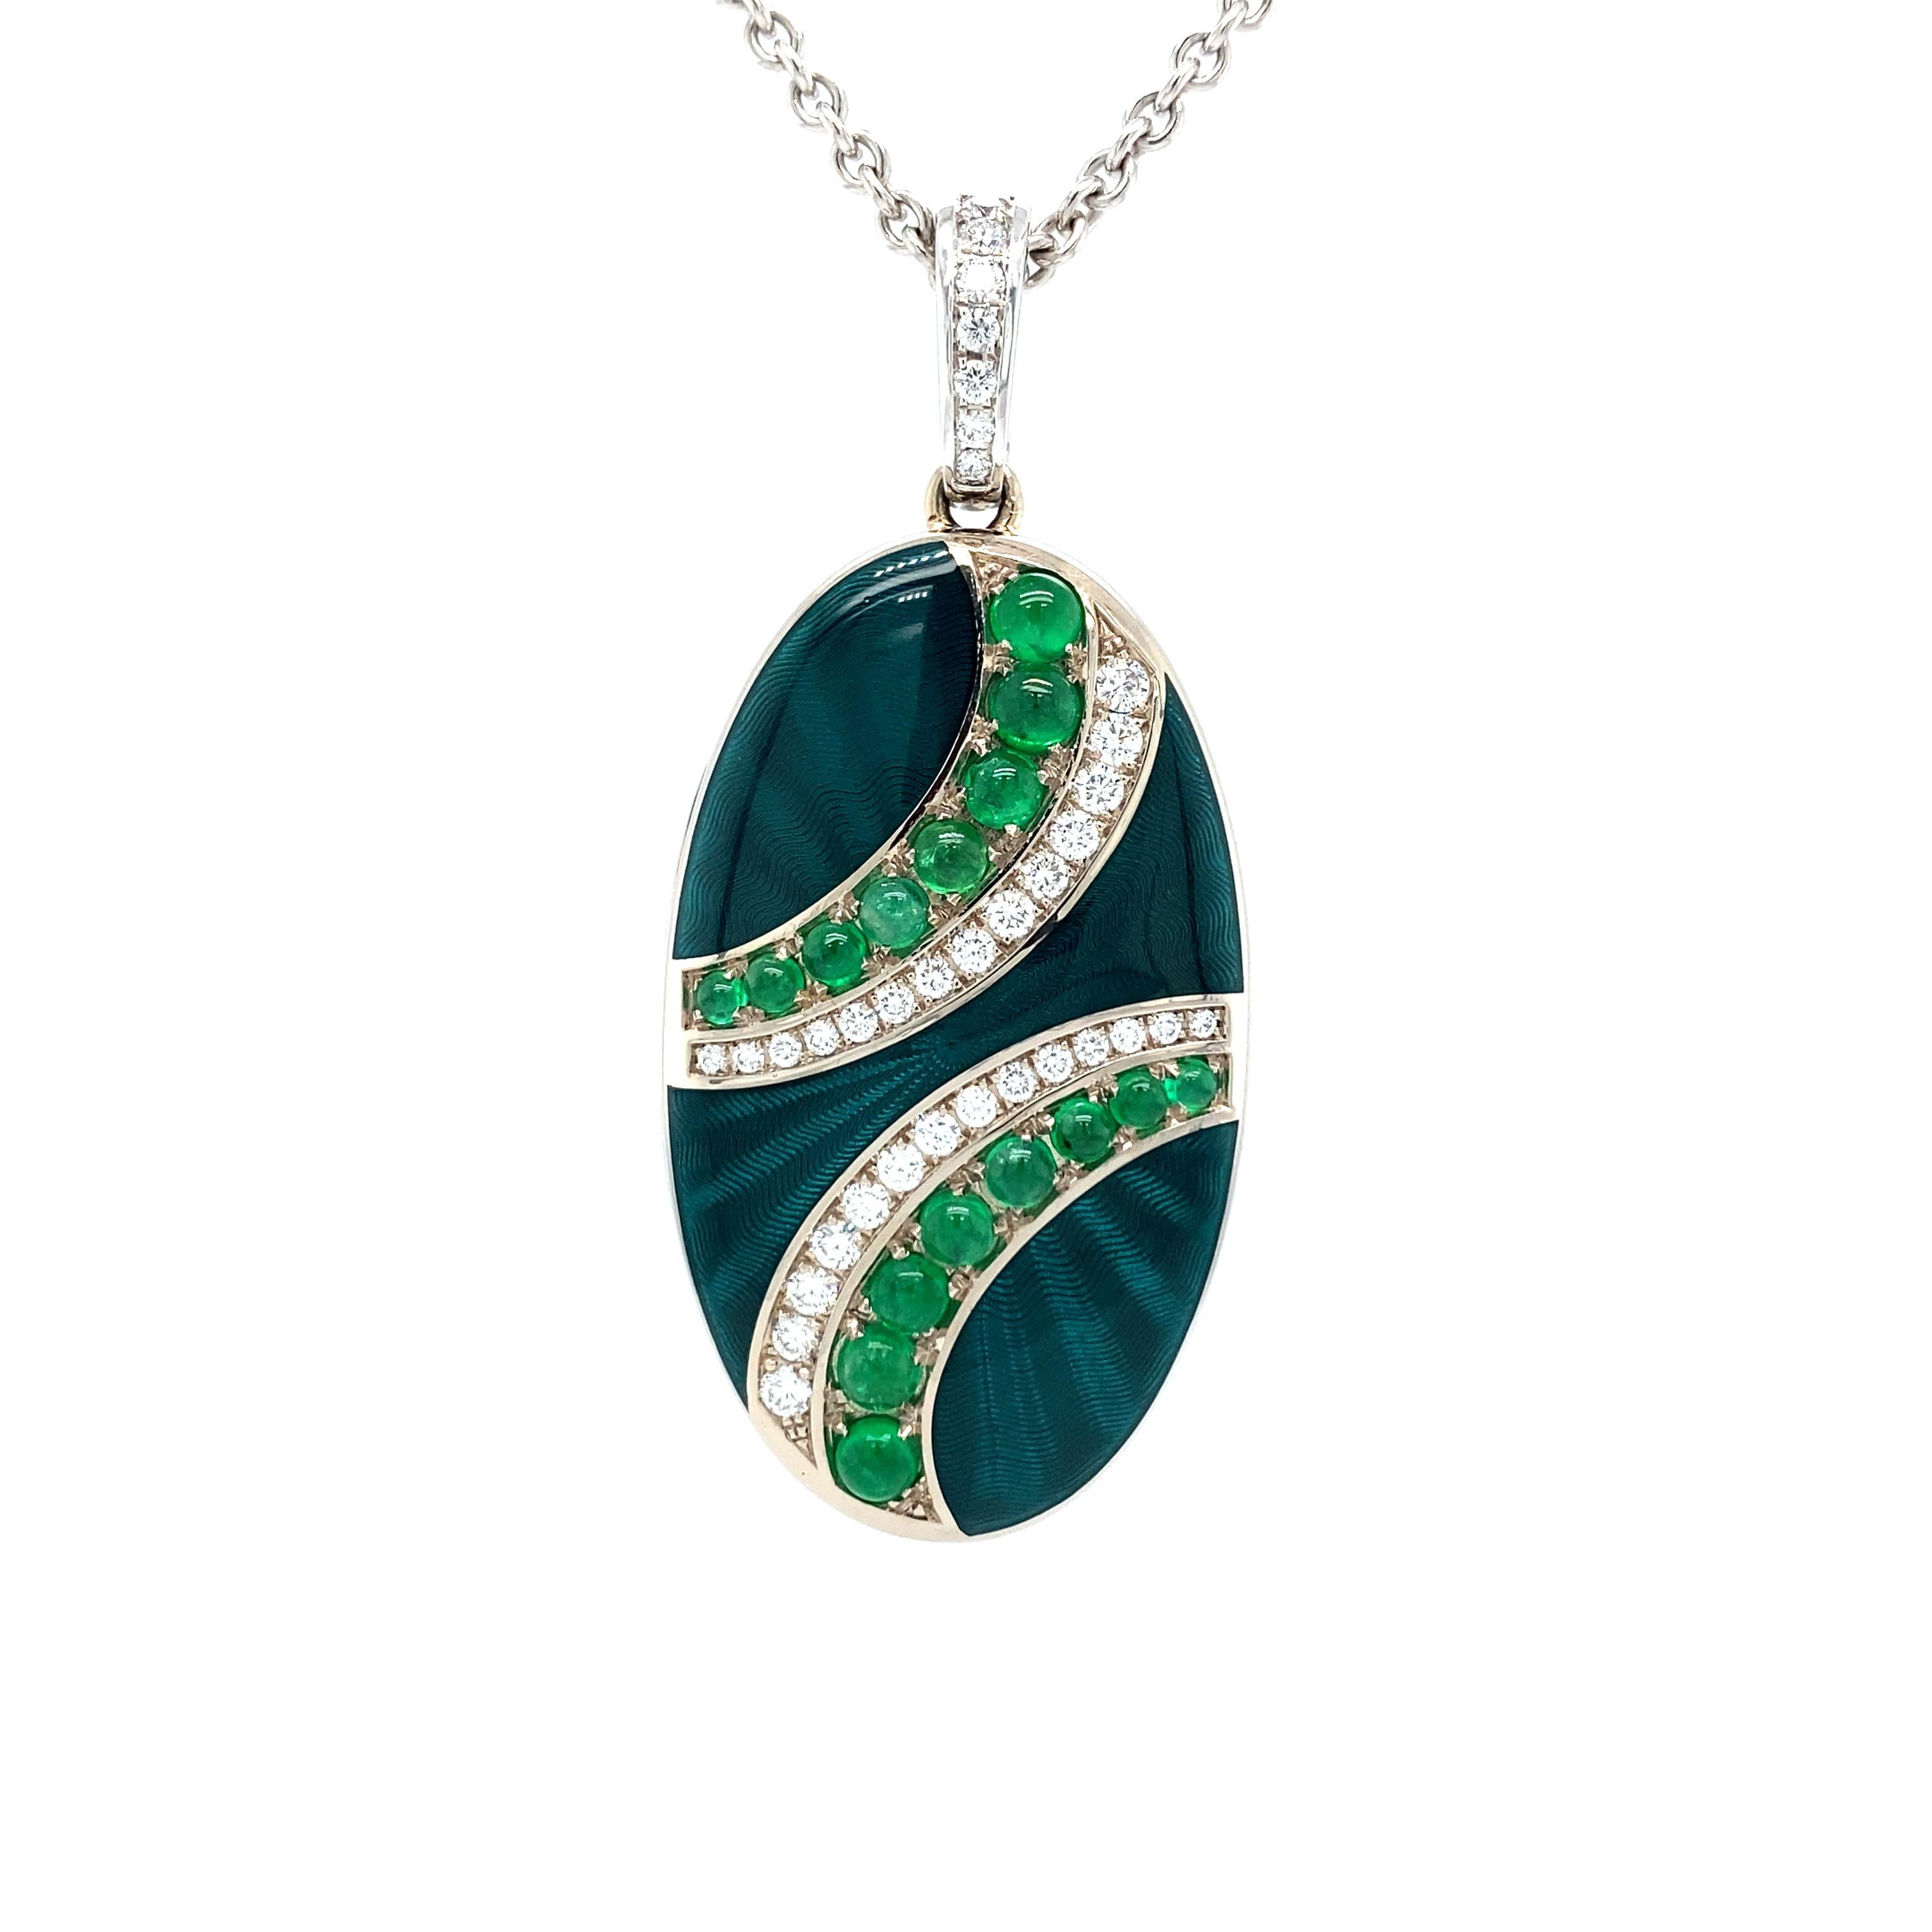 Victor Mayer oval locket pendant 18k white gold, Peacock Collection, emerald green guilloche vitreous enamel, 35 diamonds, total 0.69 ct, G VS, brilliant cut, 18 Emerald Cabochons, total 1.87 ct, 39.5 mm x 23.0 mm

About the creator Victor